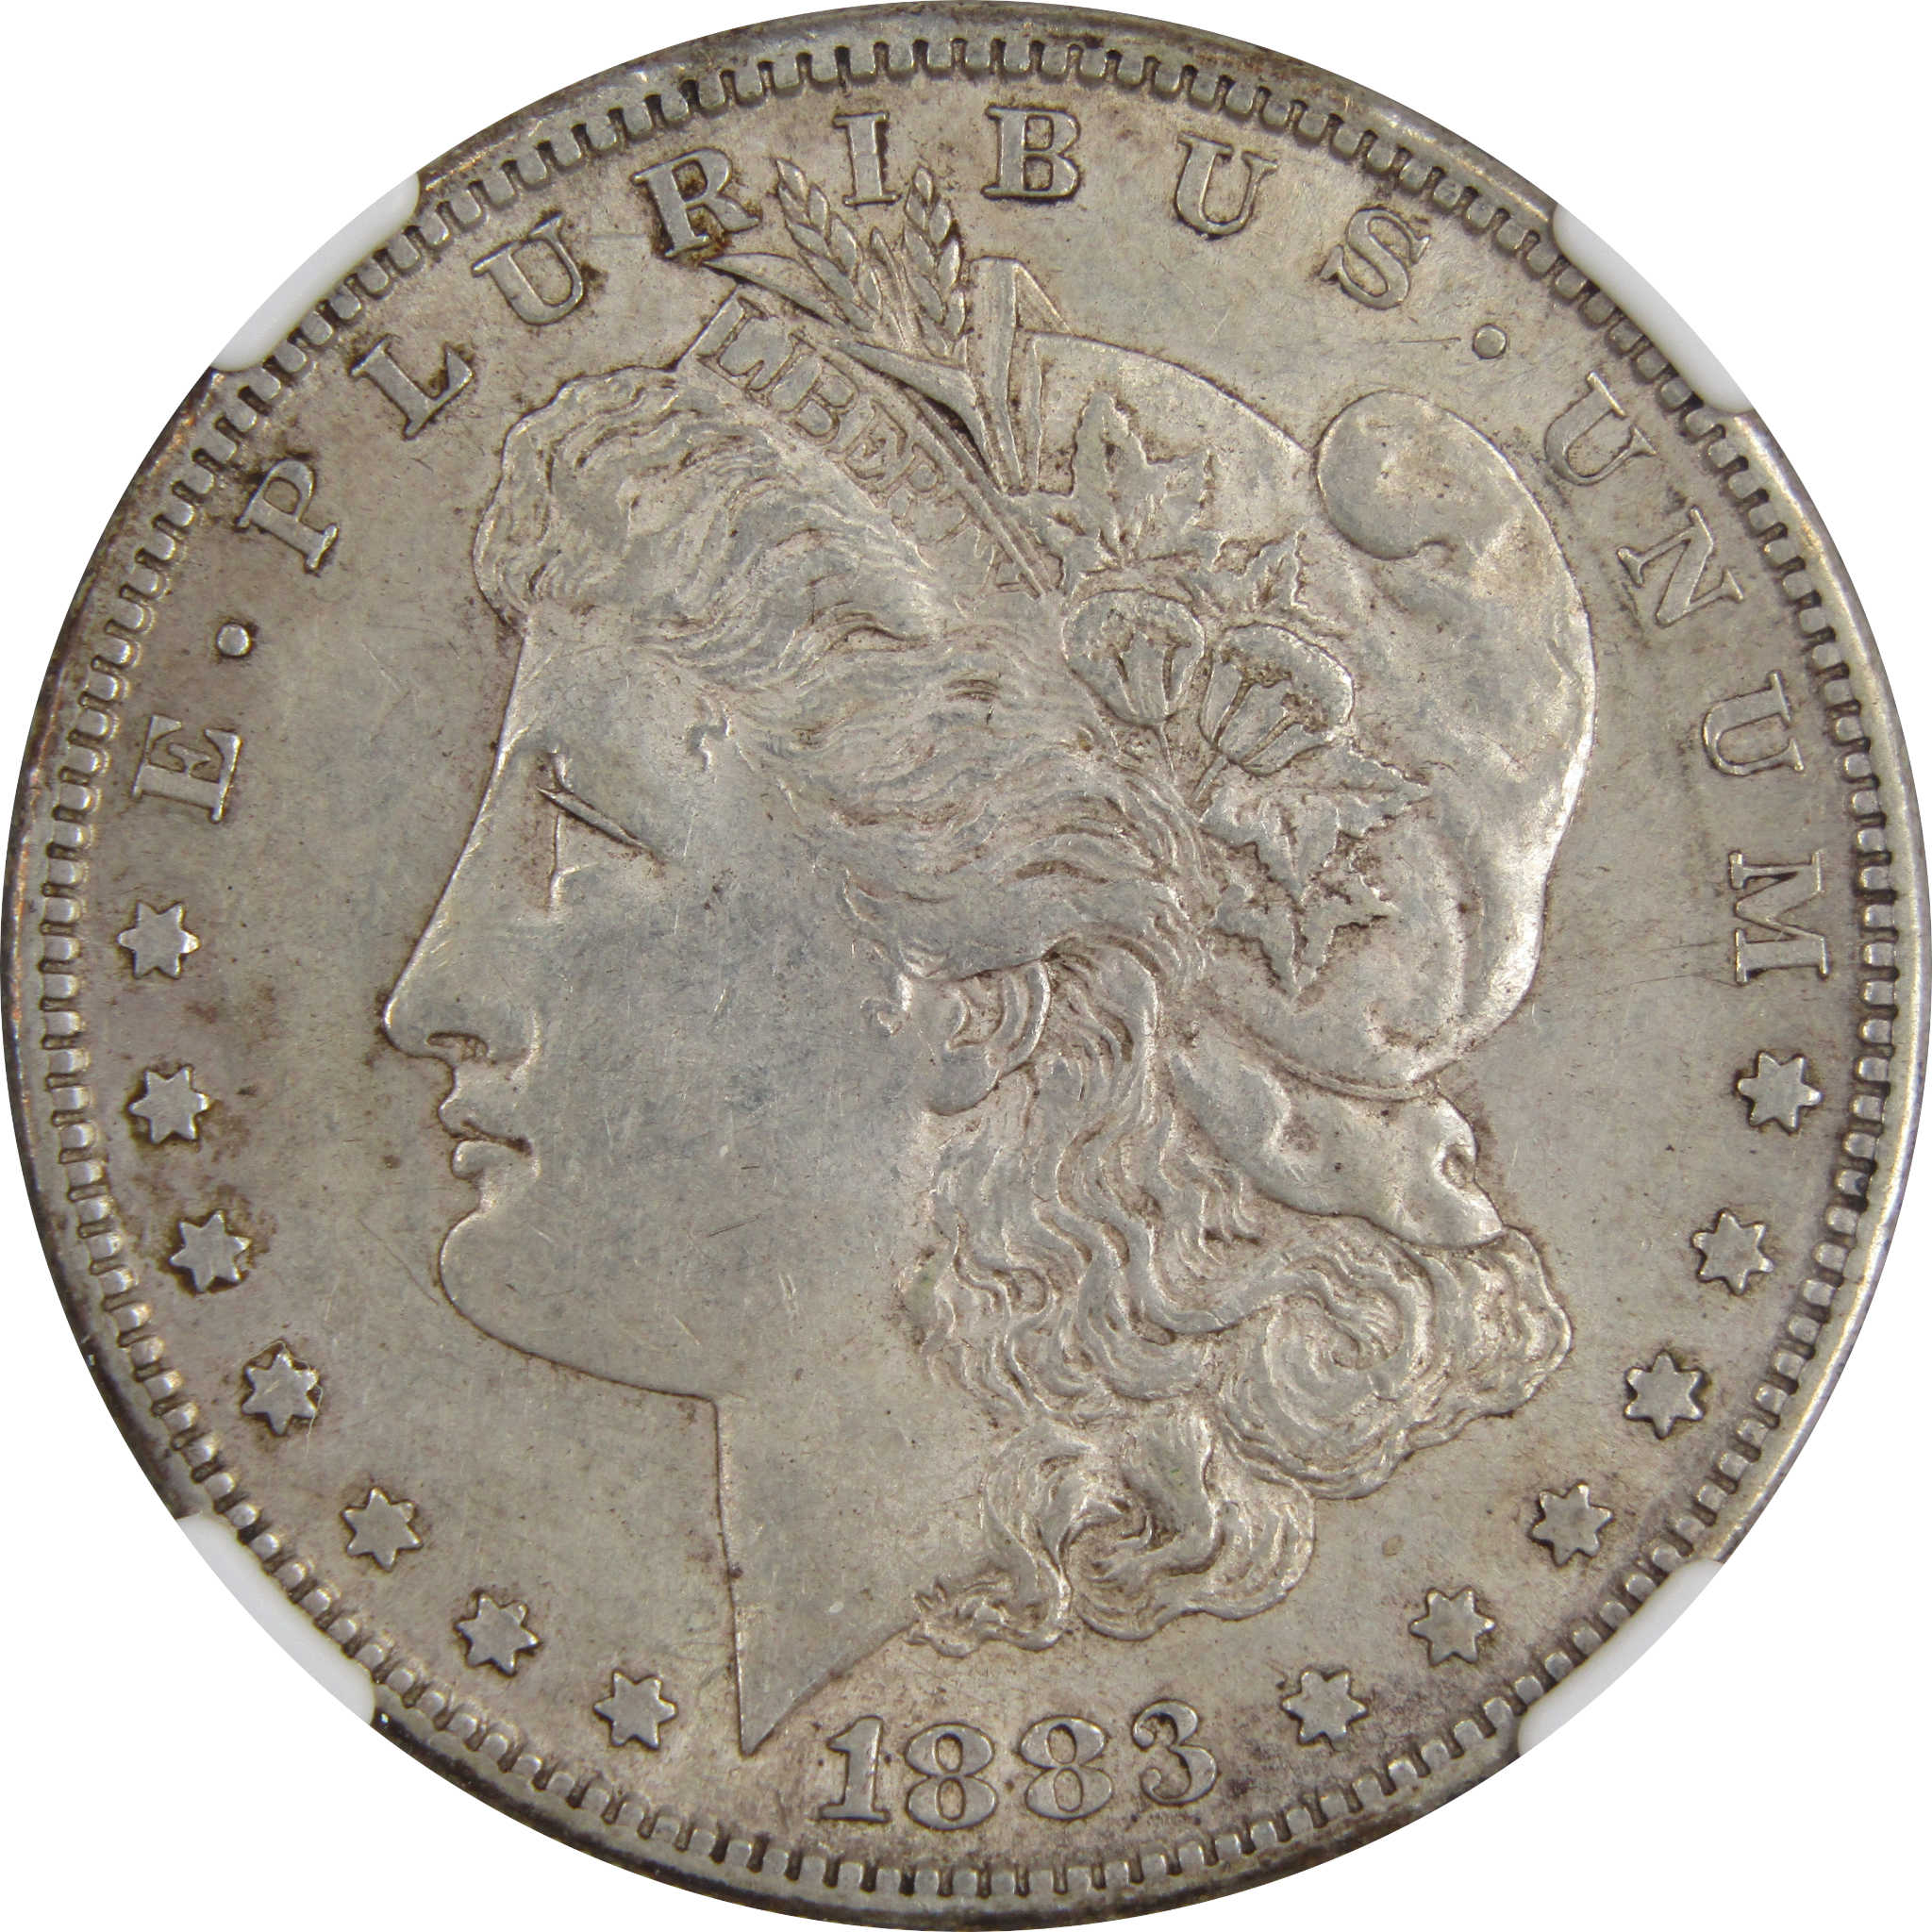 1883 S Morgan Dollar AU 55 NGC 90% Silver US Coin SKU:I2306 - Morgan coin - Morgan silver dollar - Morgan silver dollar for sale - Profile Coins &amp; Collectibles